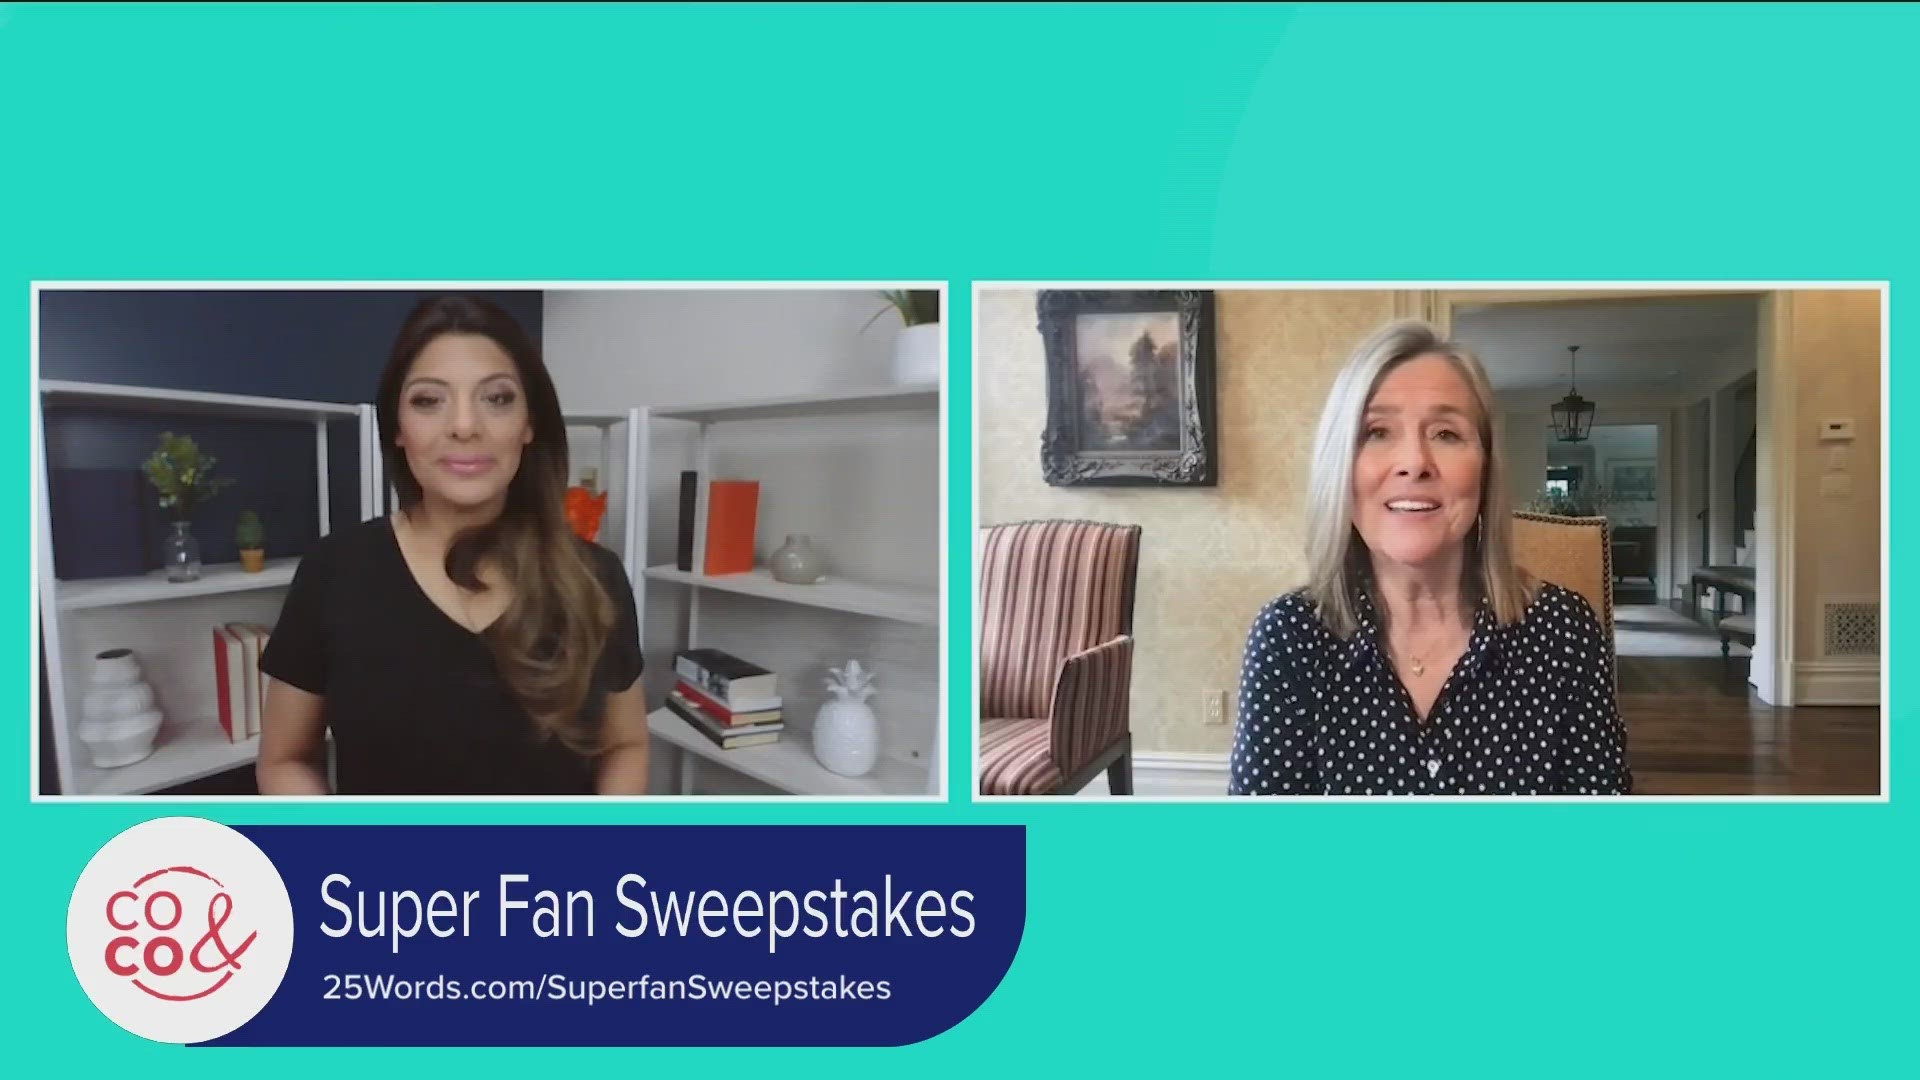 Get in on your chance to win the Super Fan Sweepstakes! 25 Words or Less airs weeknights on KTVD.